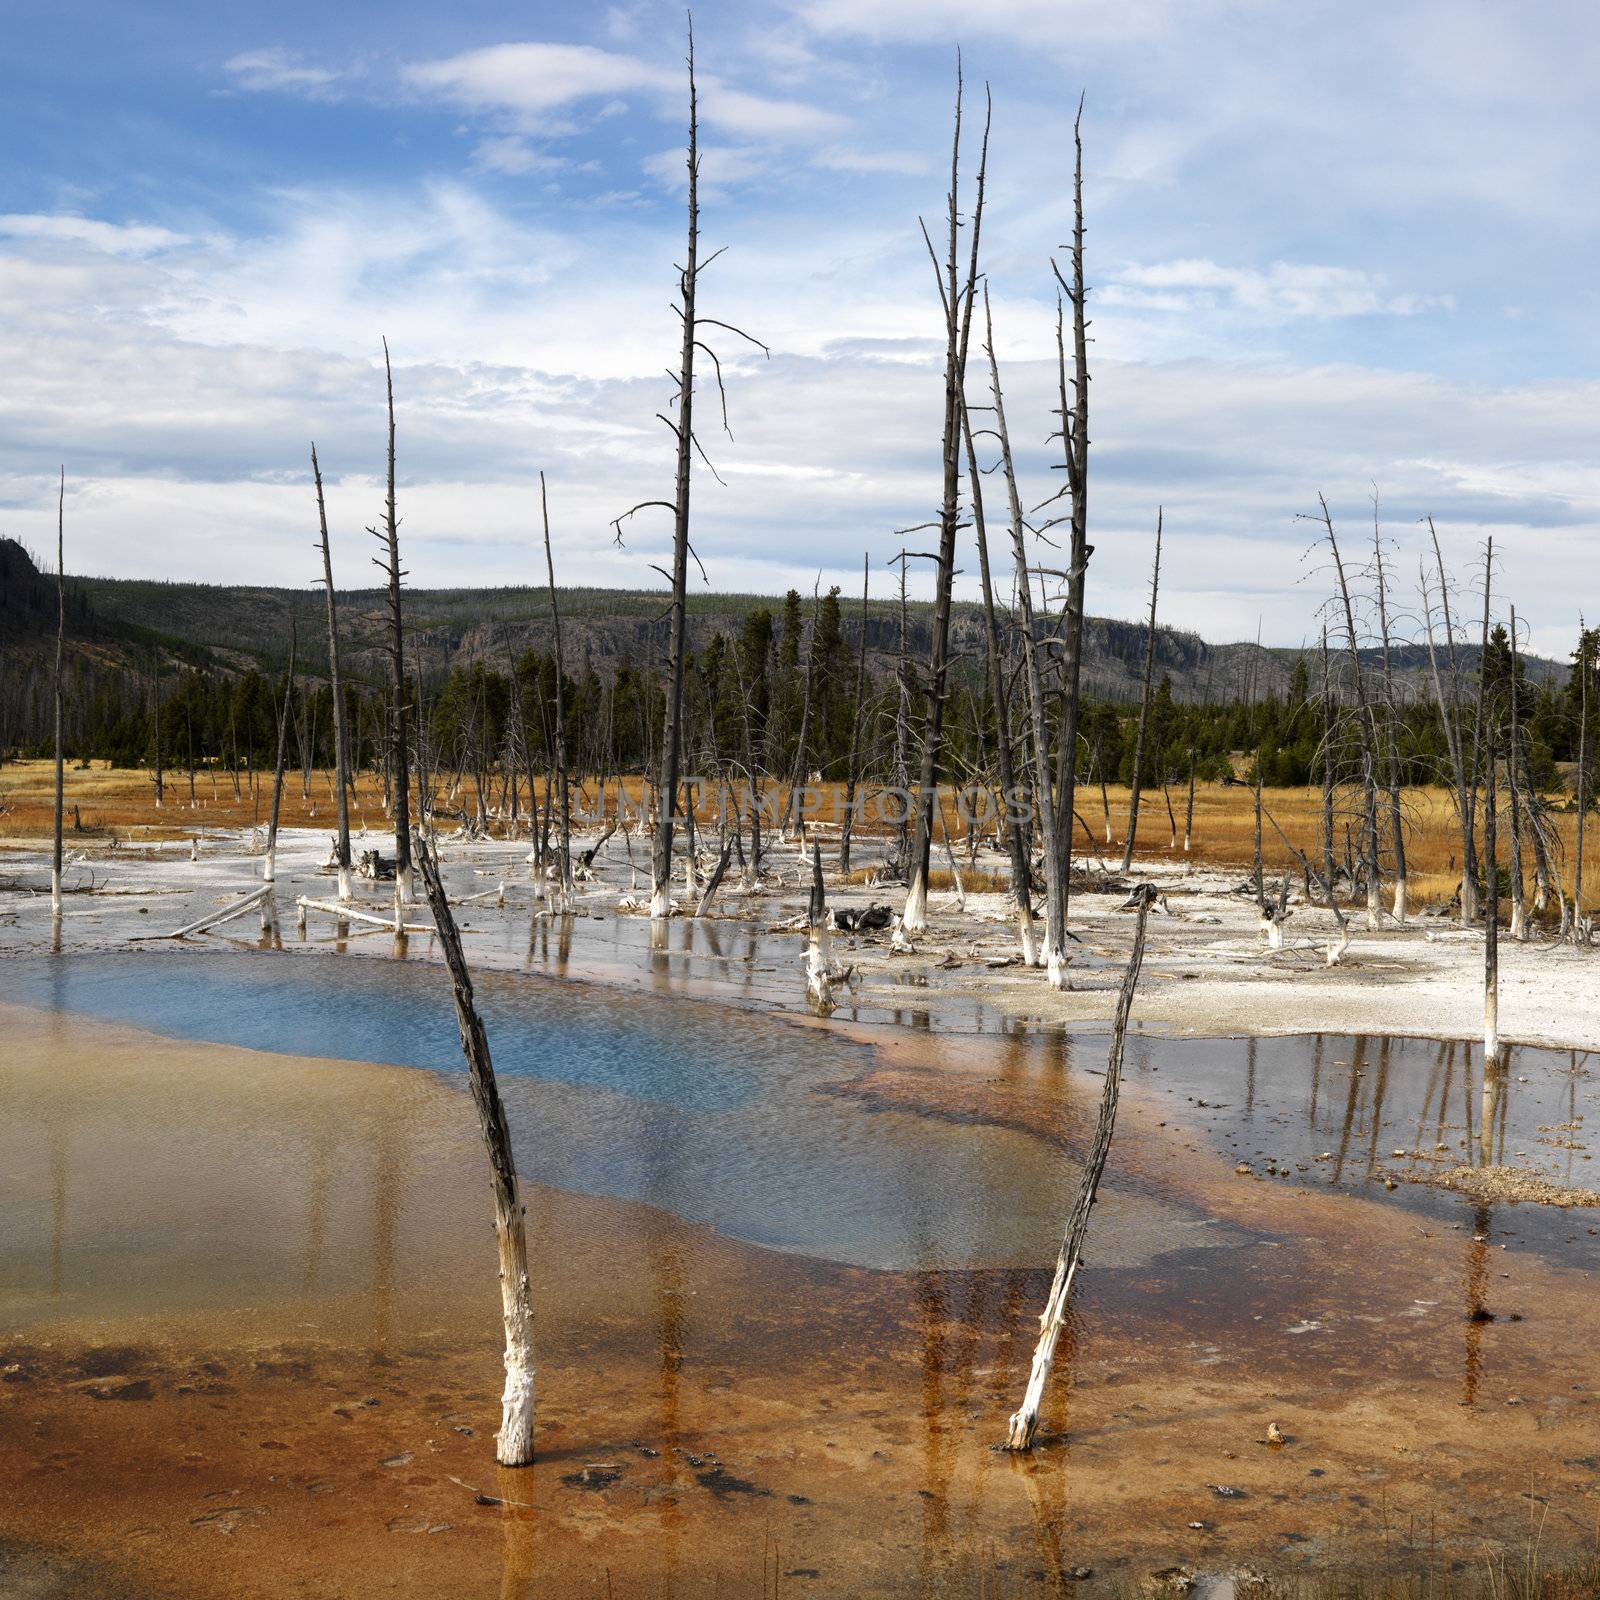 Landscape of dead trees in shallow water pool at Yellowstone National Park, Wyoming.